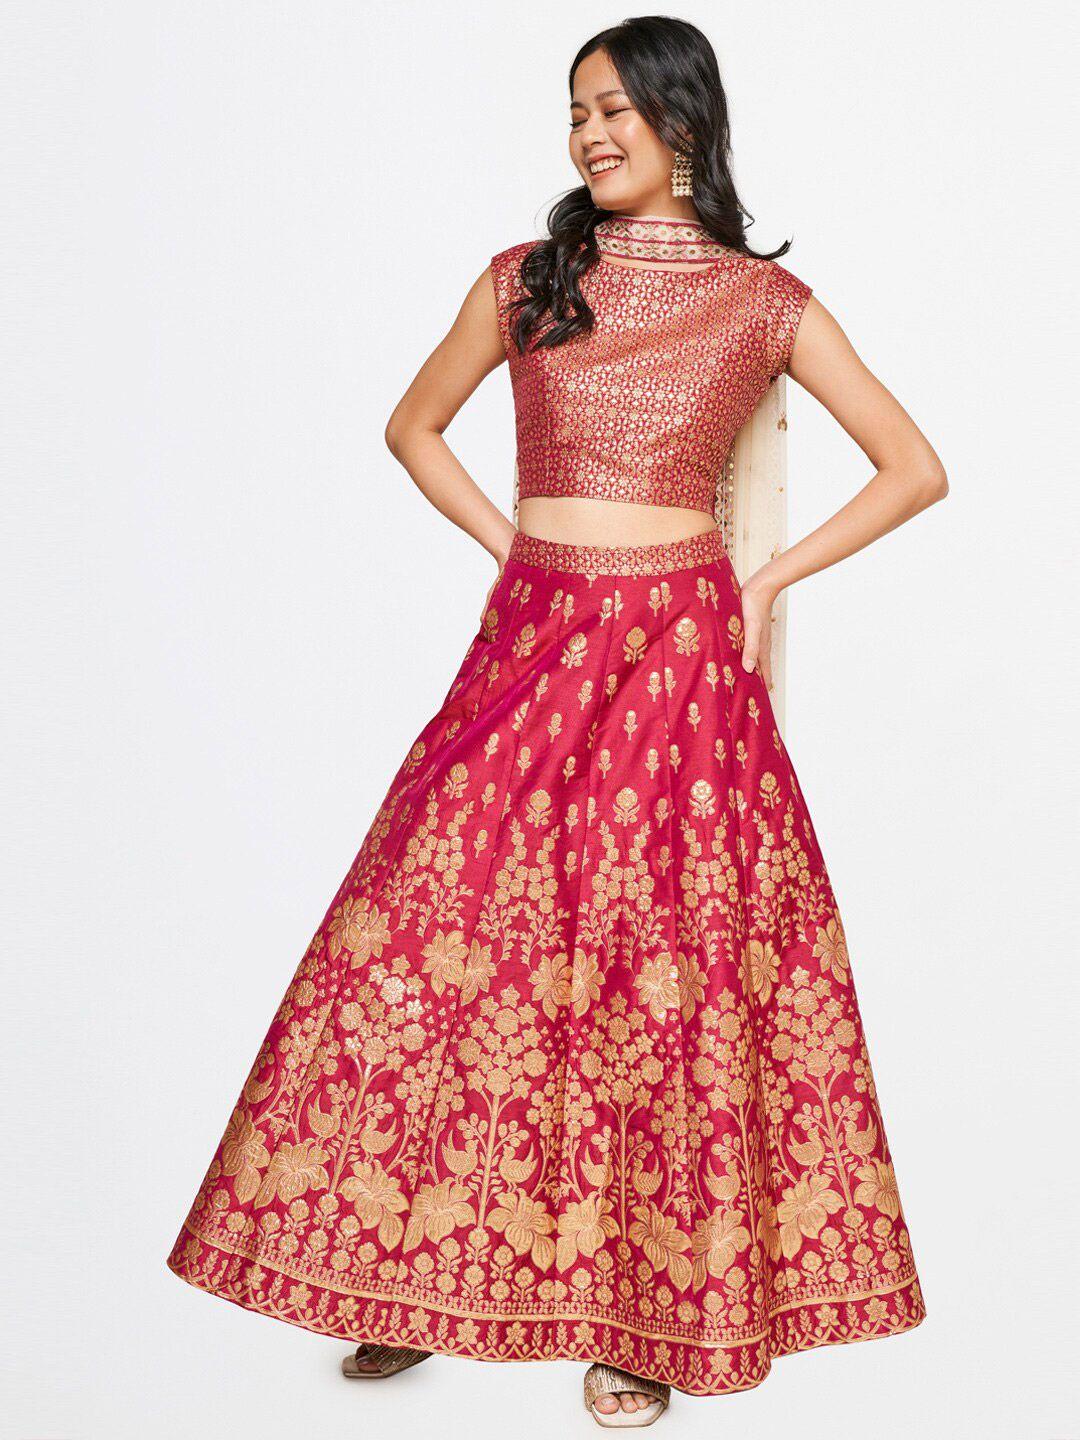 global desi floral brocade ready to wear lehenga & blouse with dupatta